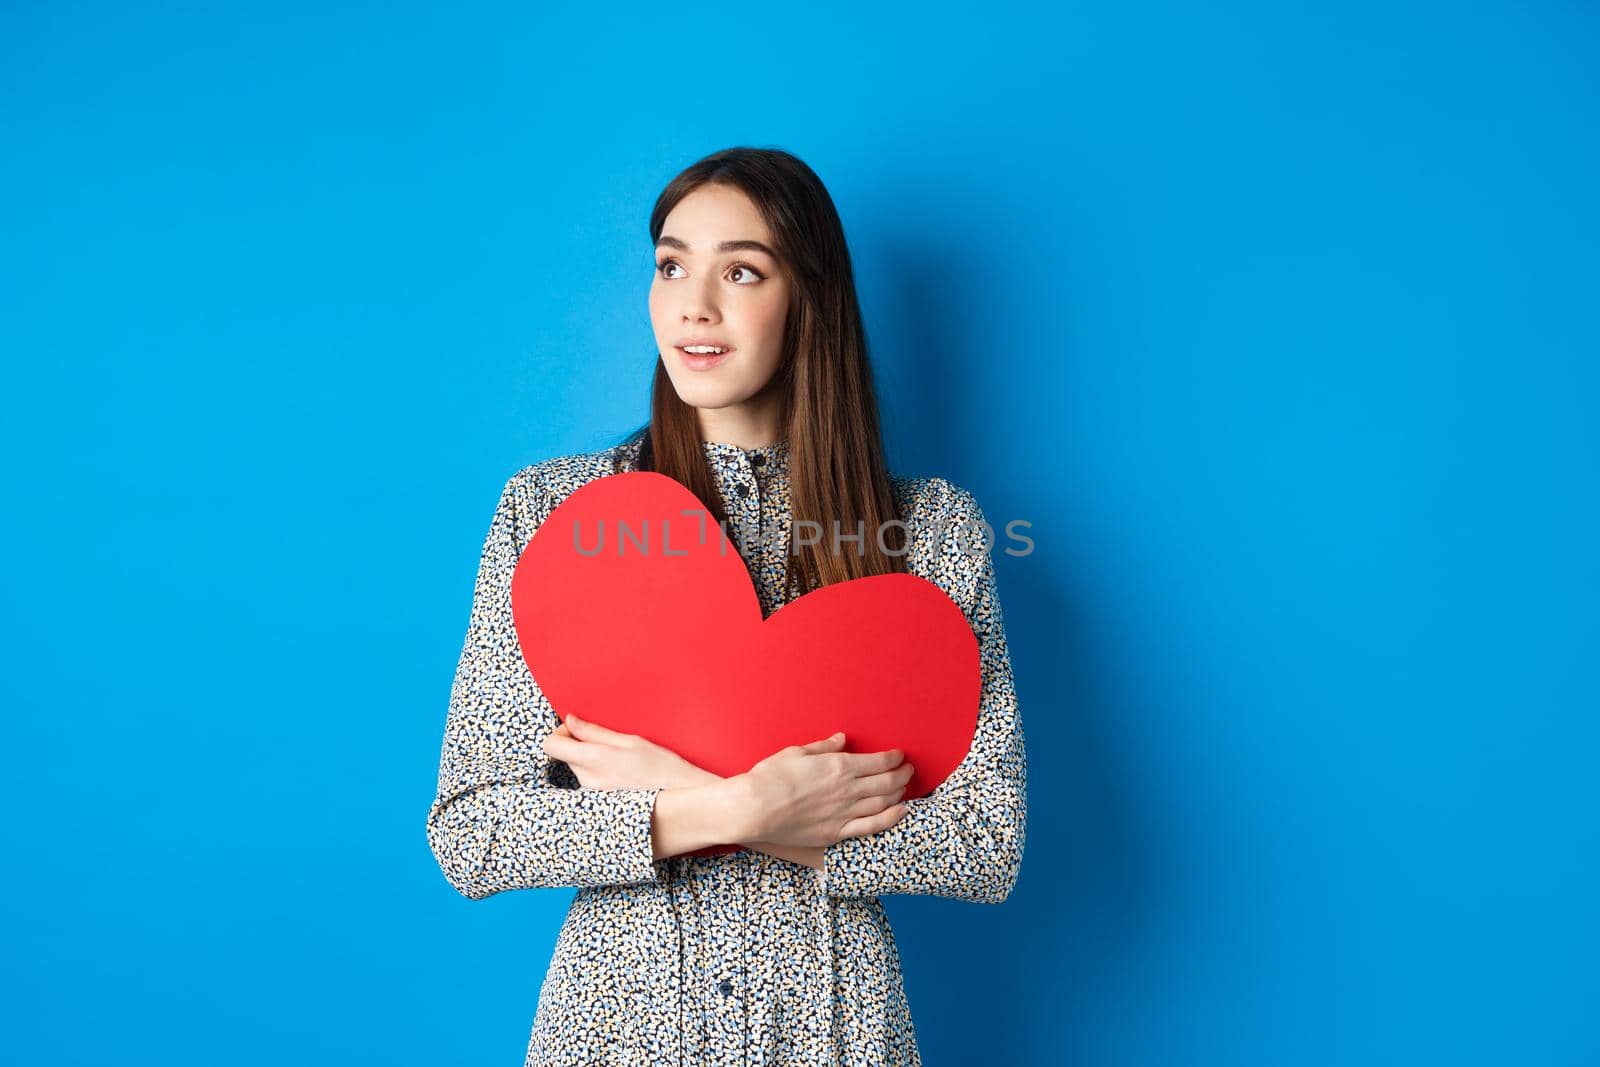 Valentines day. Hopeful girl dreaming off soulmate, looking aside at empty space with excitement, hugging big red heart cutout, standing on blue background.